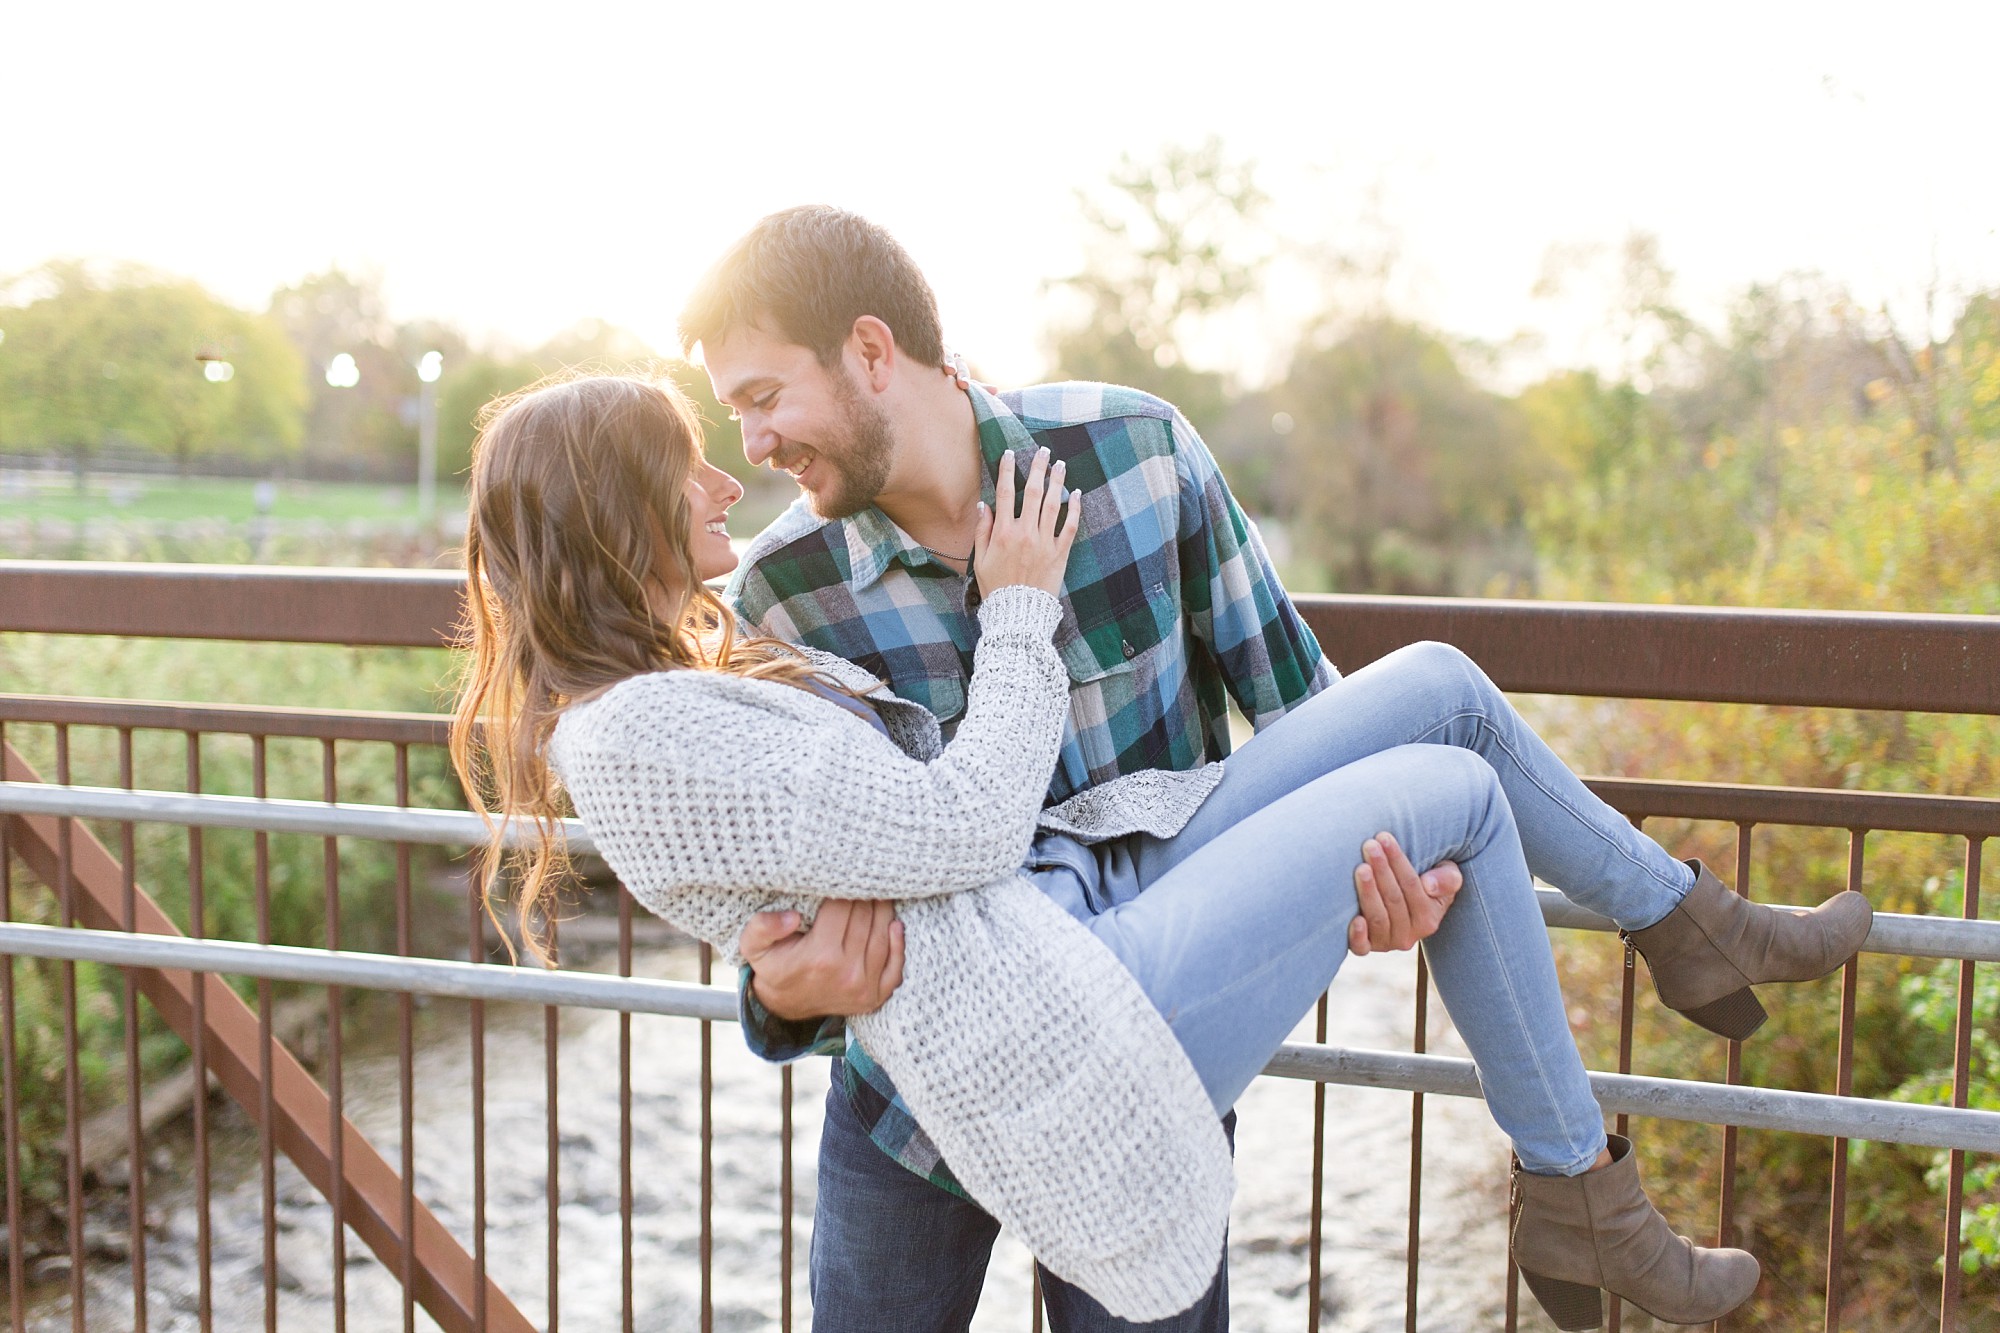 A classic Fall engagement session in Downtown Rochester, Michigan by Breanne Rochelle Photography.